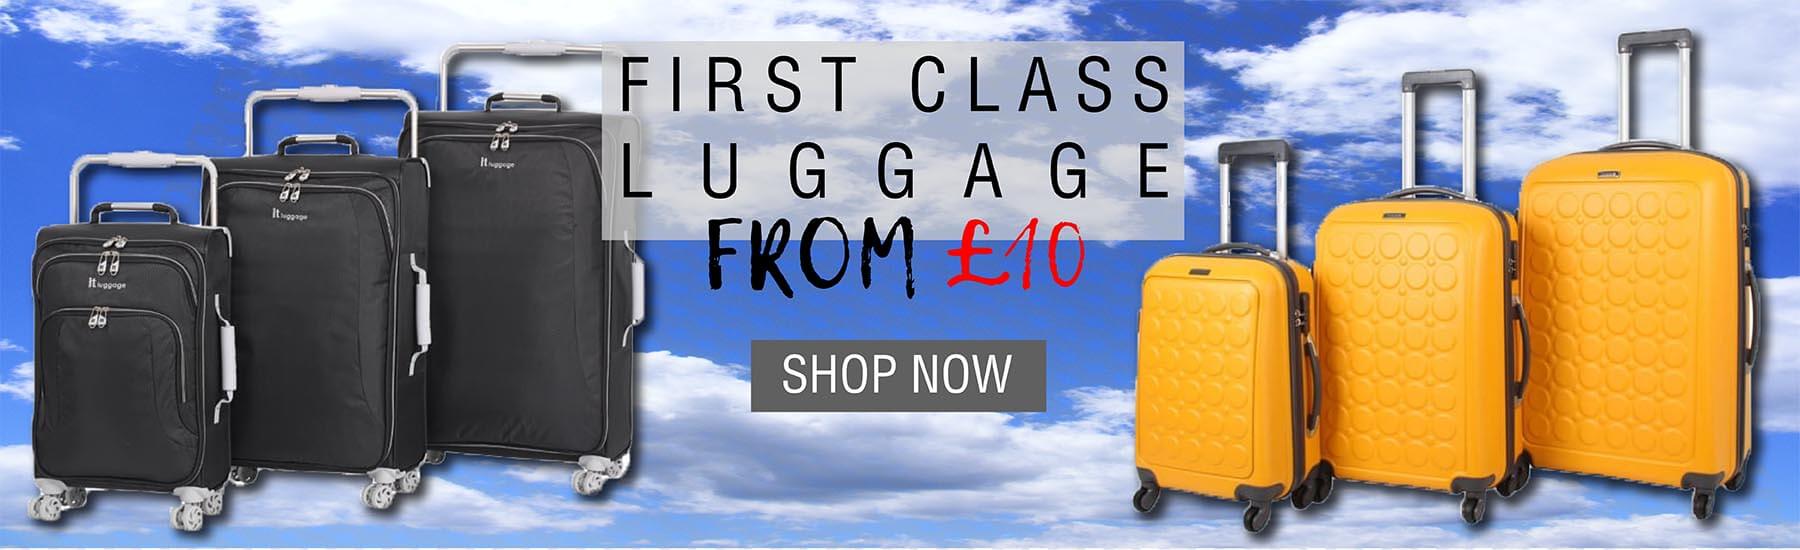 TJ Hughes: first class luggage from £10